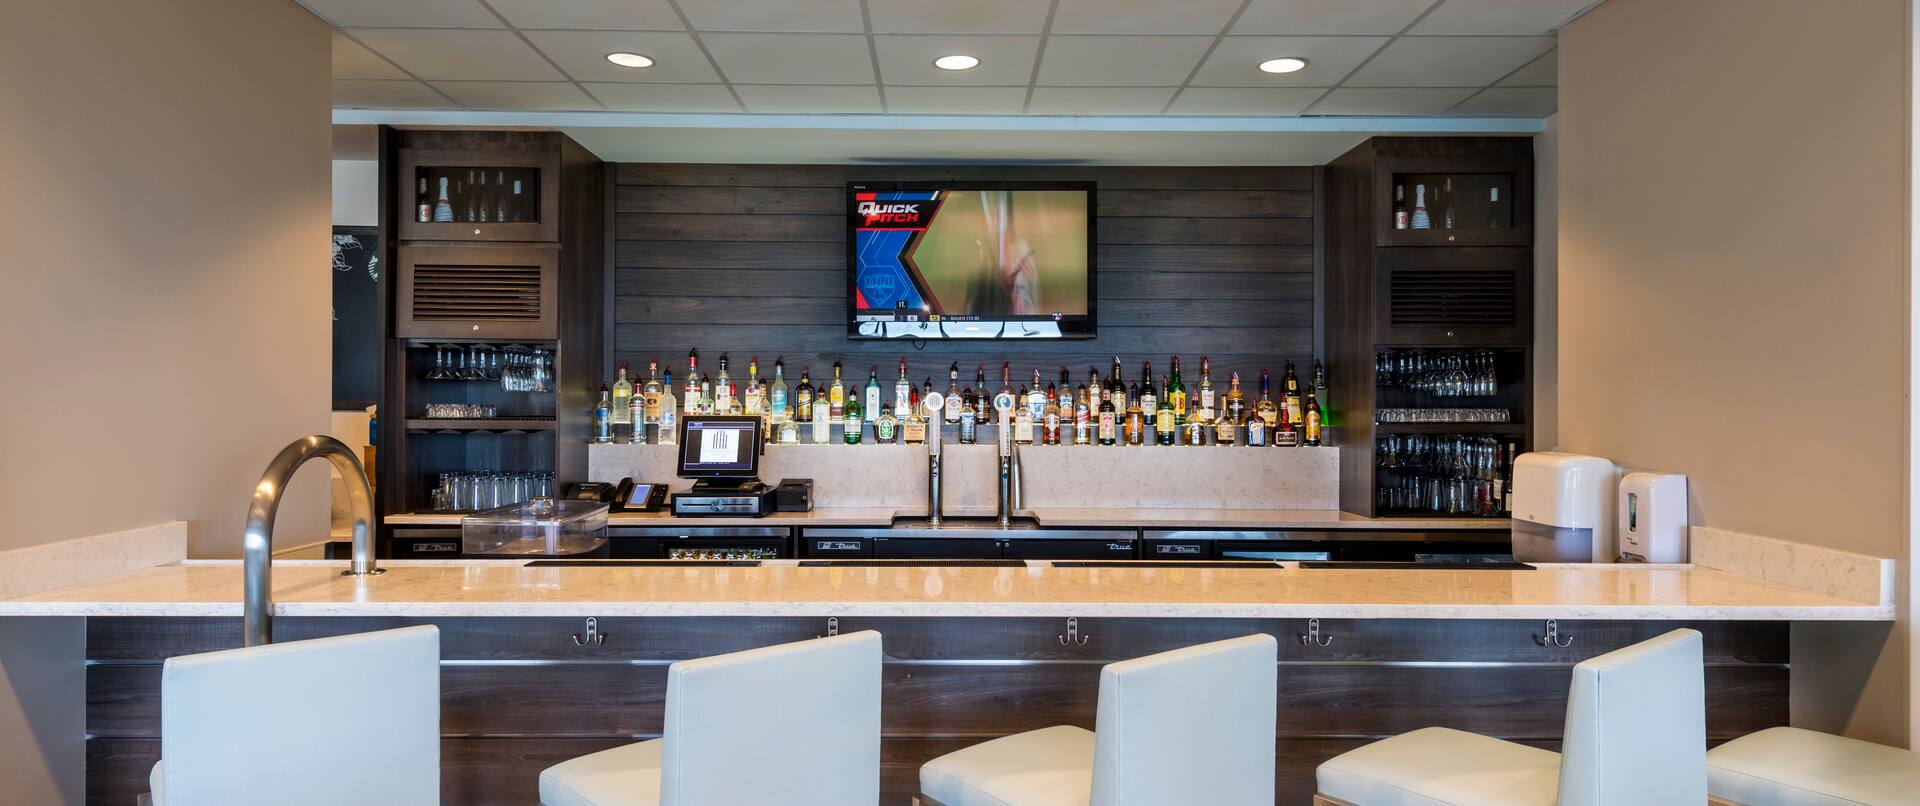 Front View of the Hotel Bar with TV and Five Bar Chairs